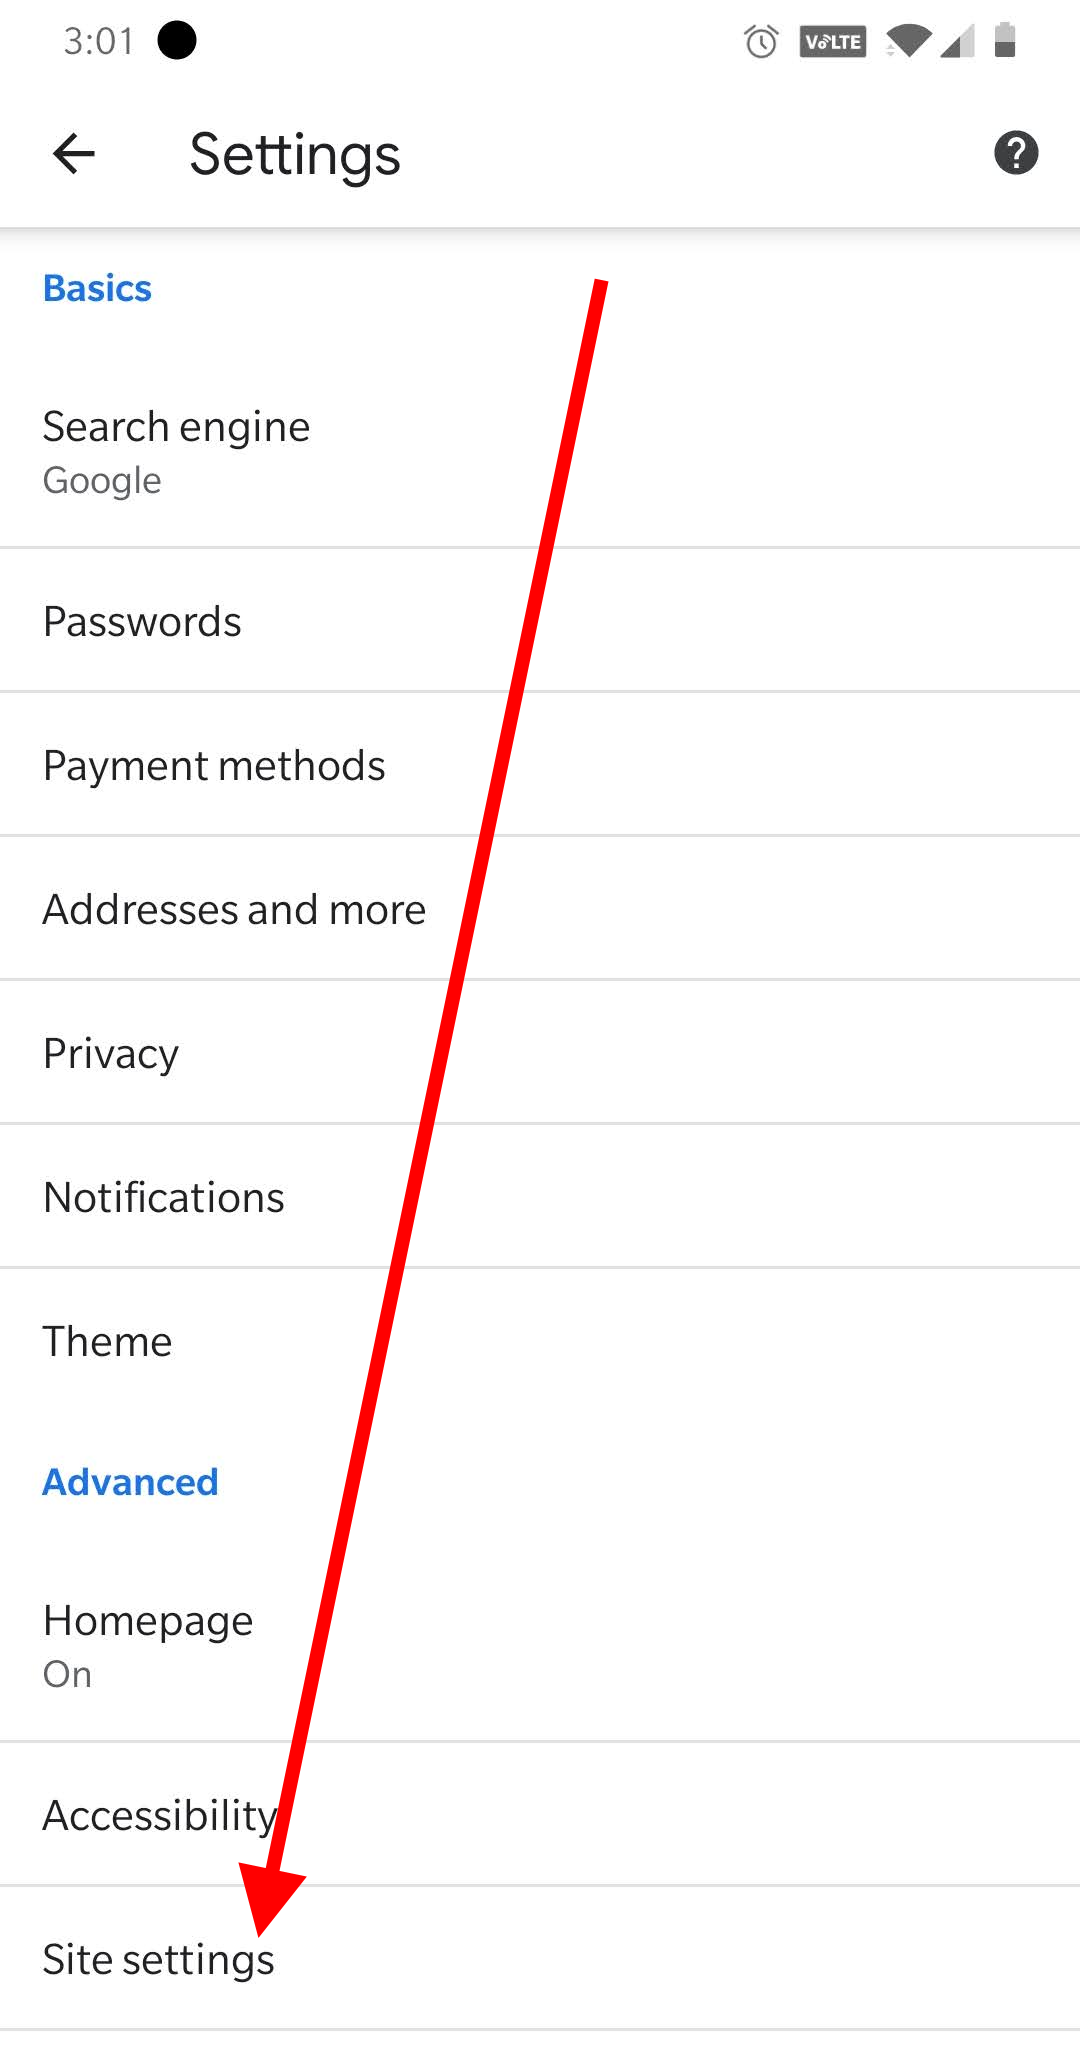 Arrow pointing at "Site settings"